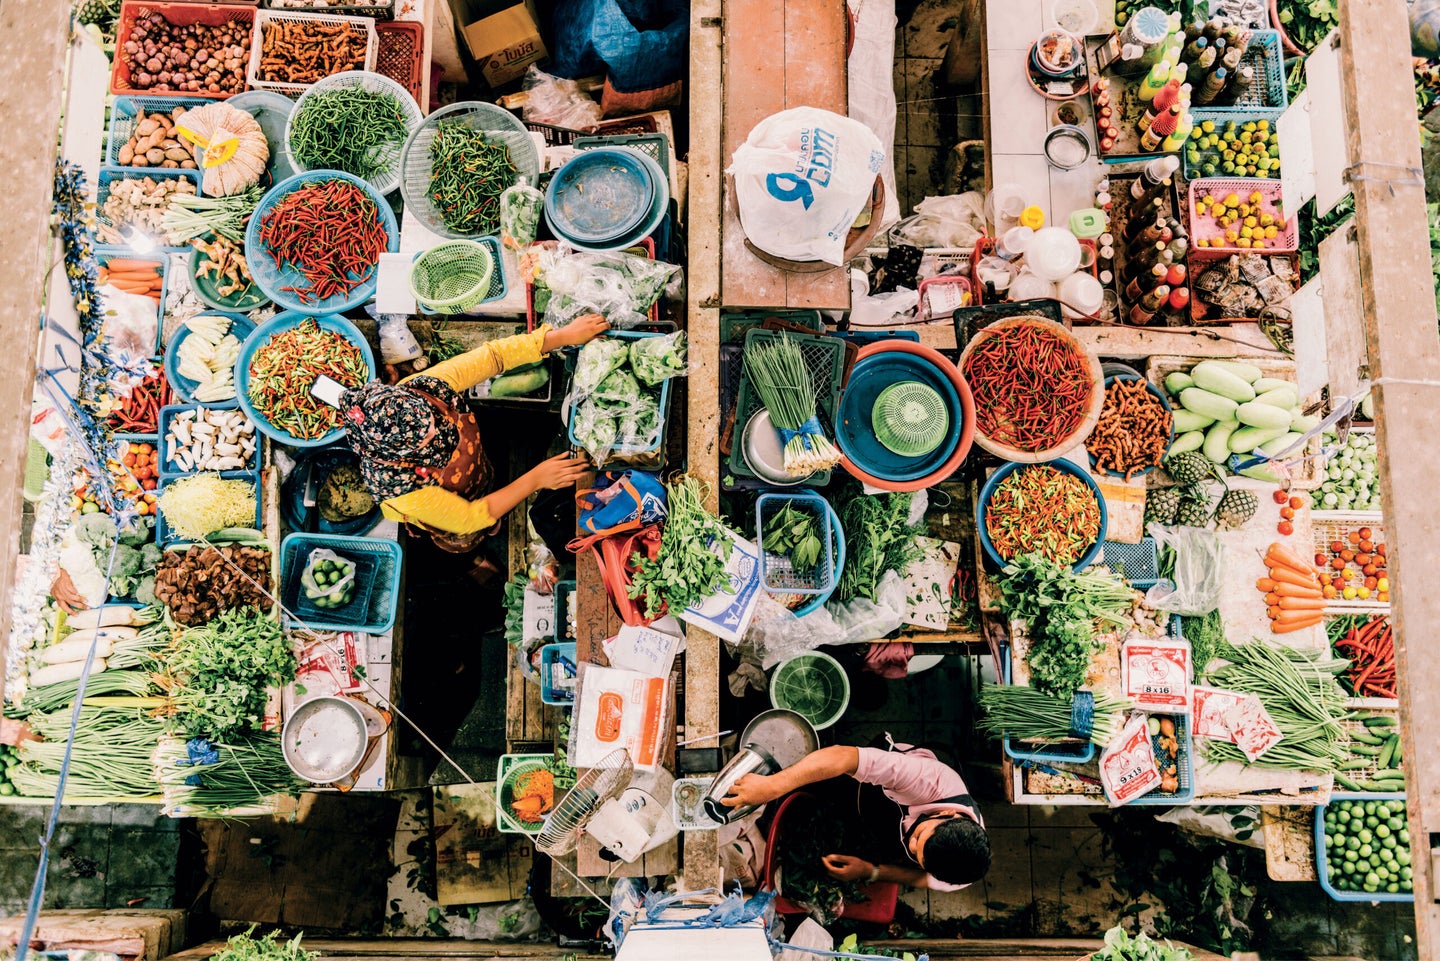 Vendors in Southern Thailand